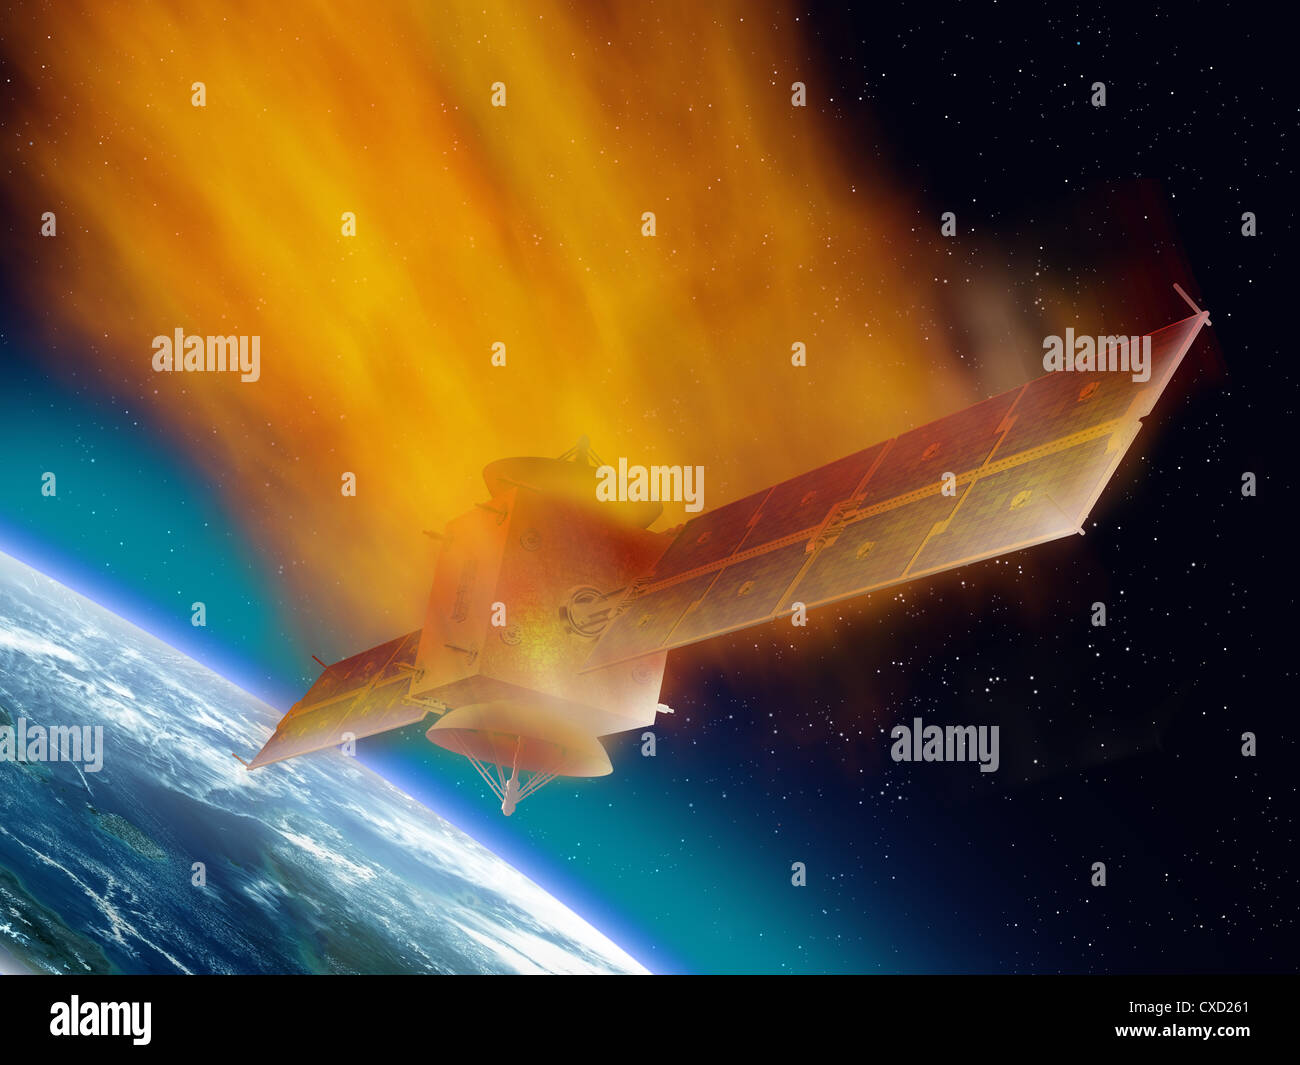 Satellite hurtling through space burning up as it enters the atmosphere Stock Photo